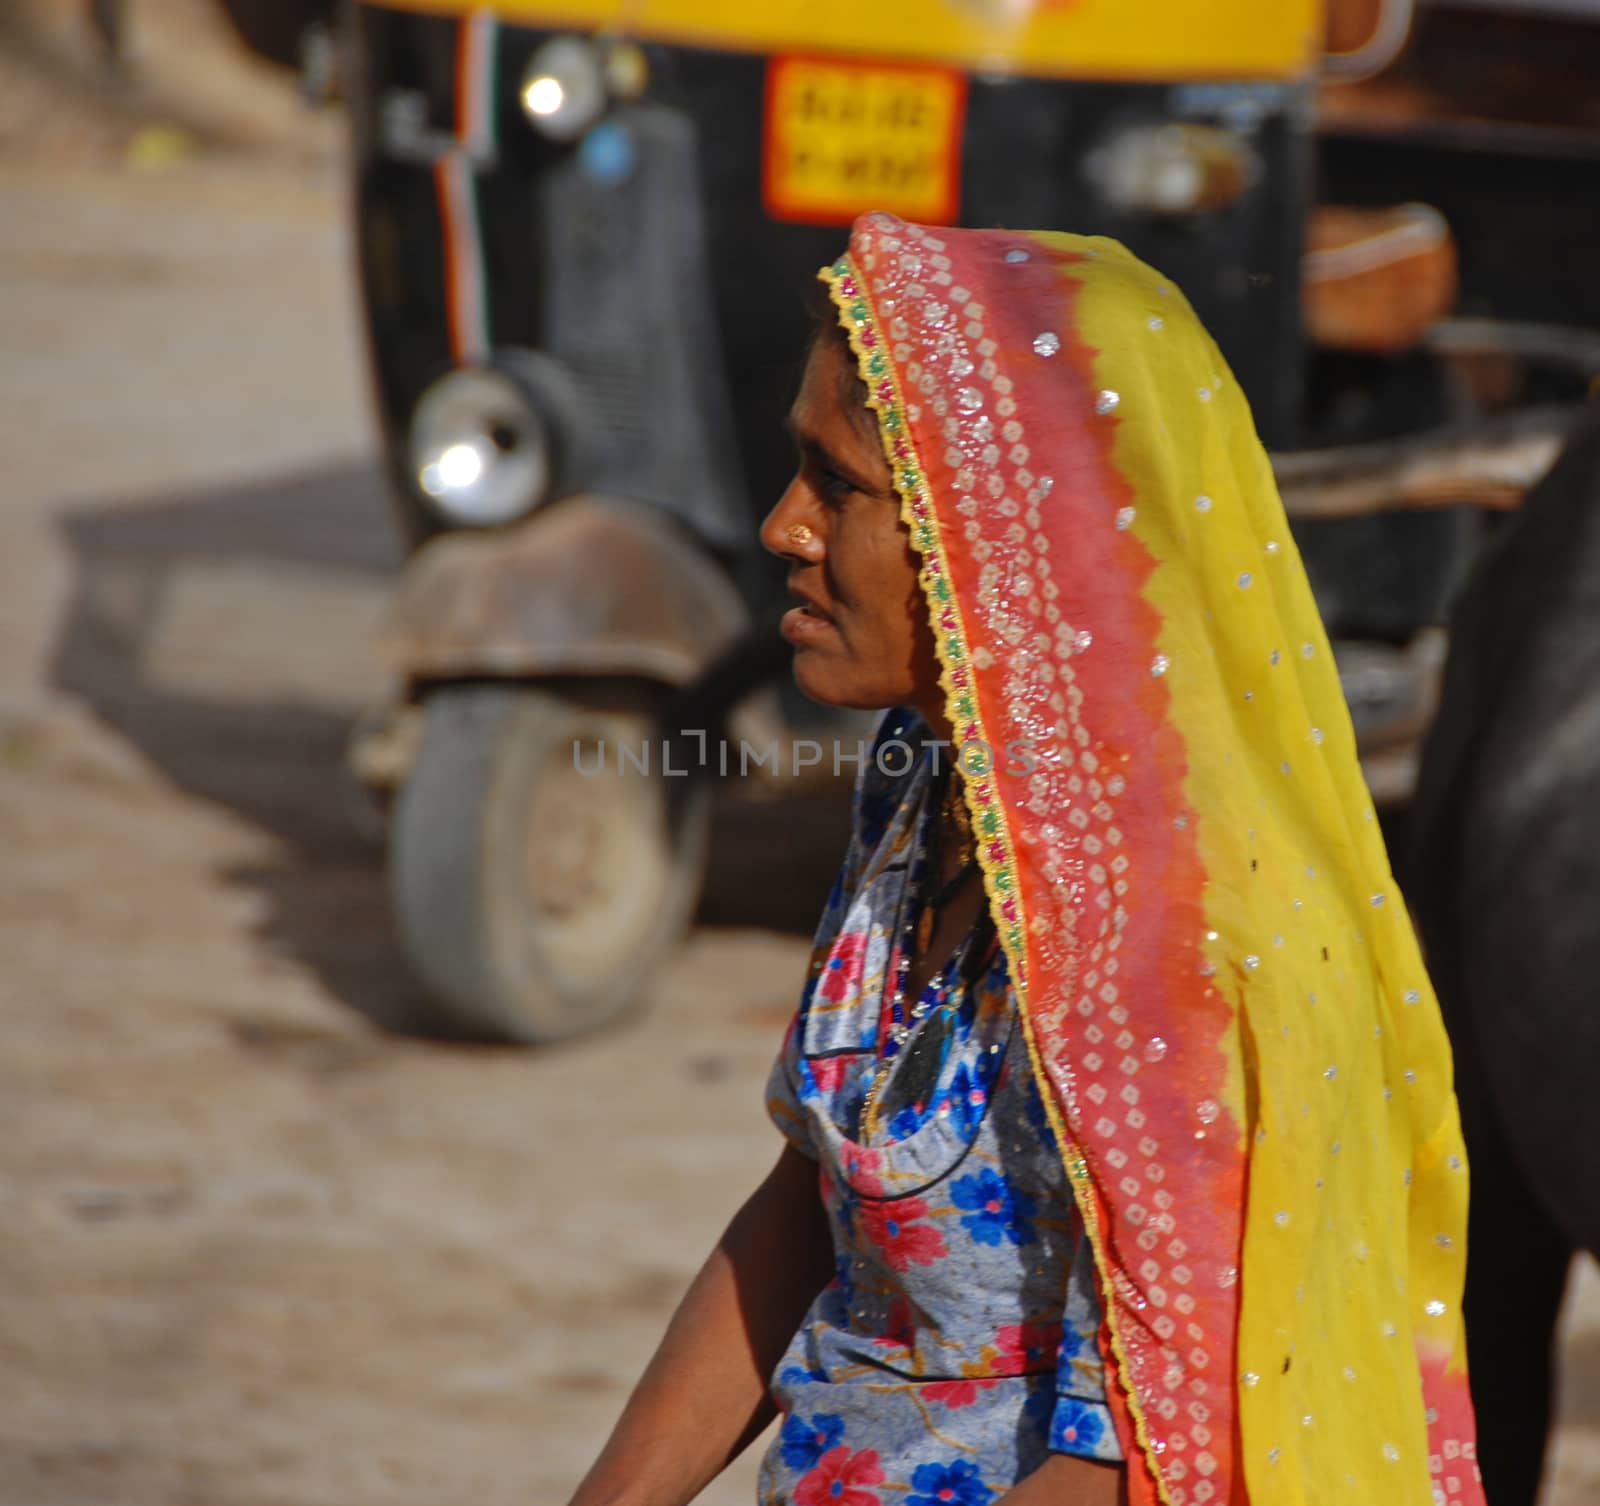 A woman on a street in Jaisalmer, India
01 Jan 2009
No model release
Editorial only